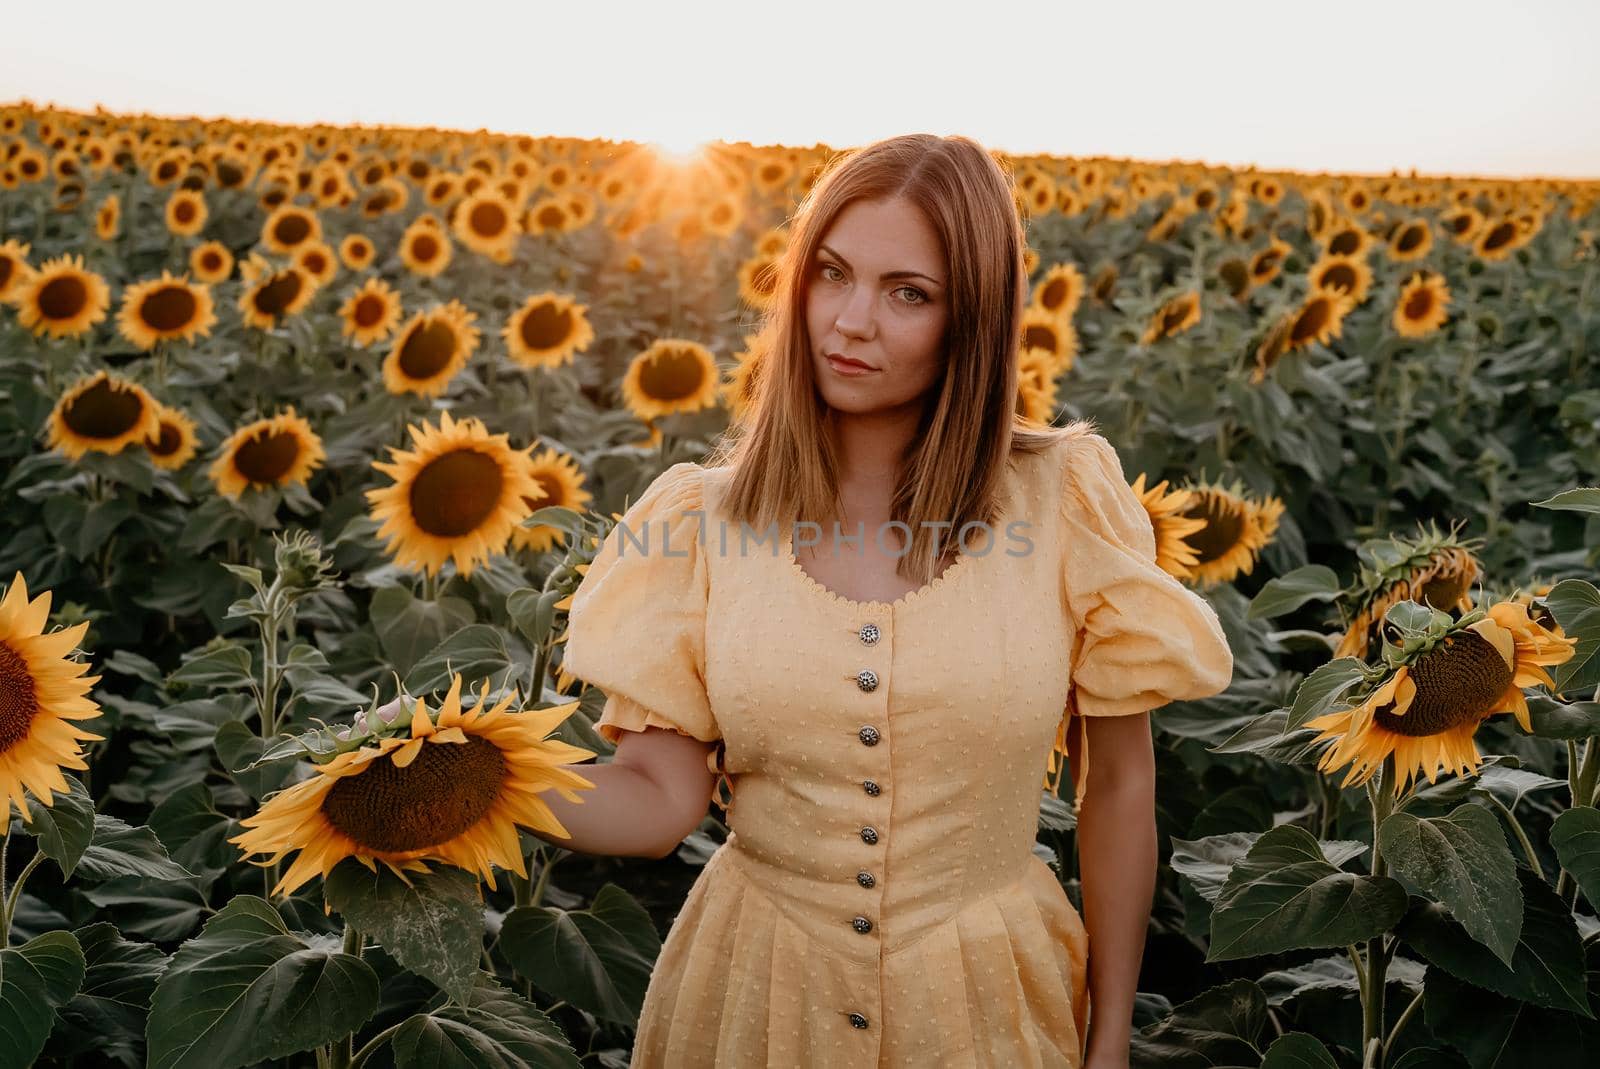 Pretty woman in retro dress posing in sunflowers field. Vintage timeless fashion, amazing adventure, countryside, rural scene, natural lifestyle. High quality photo